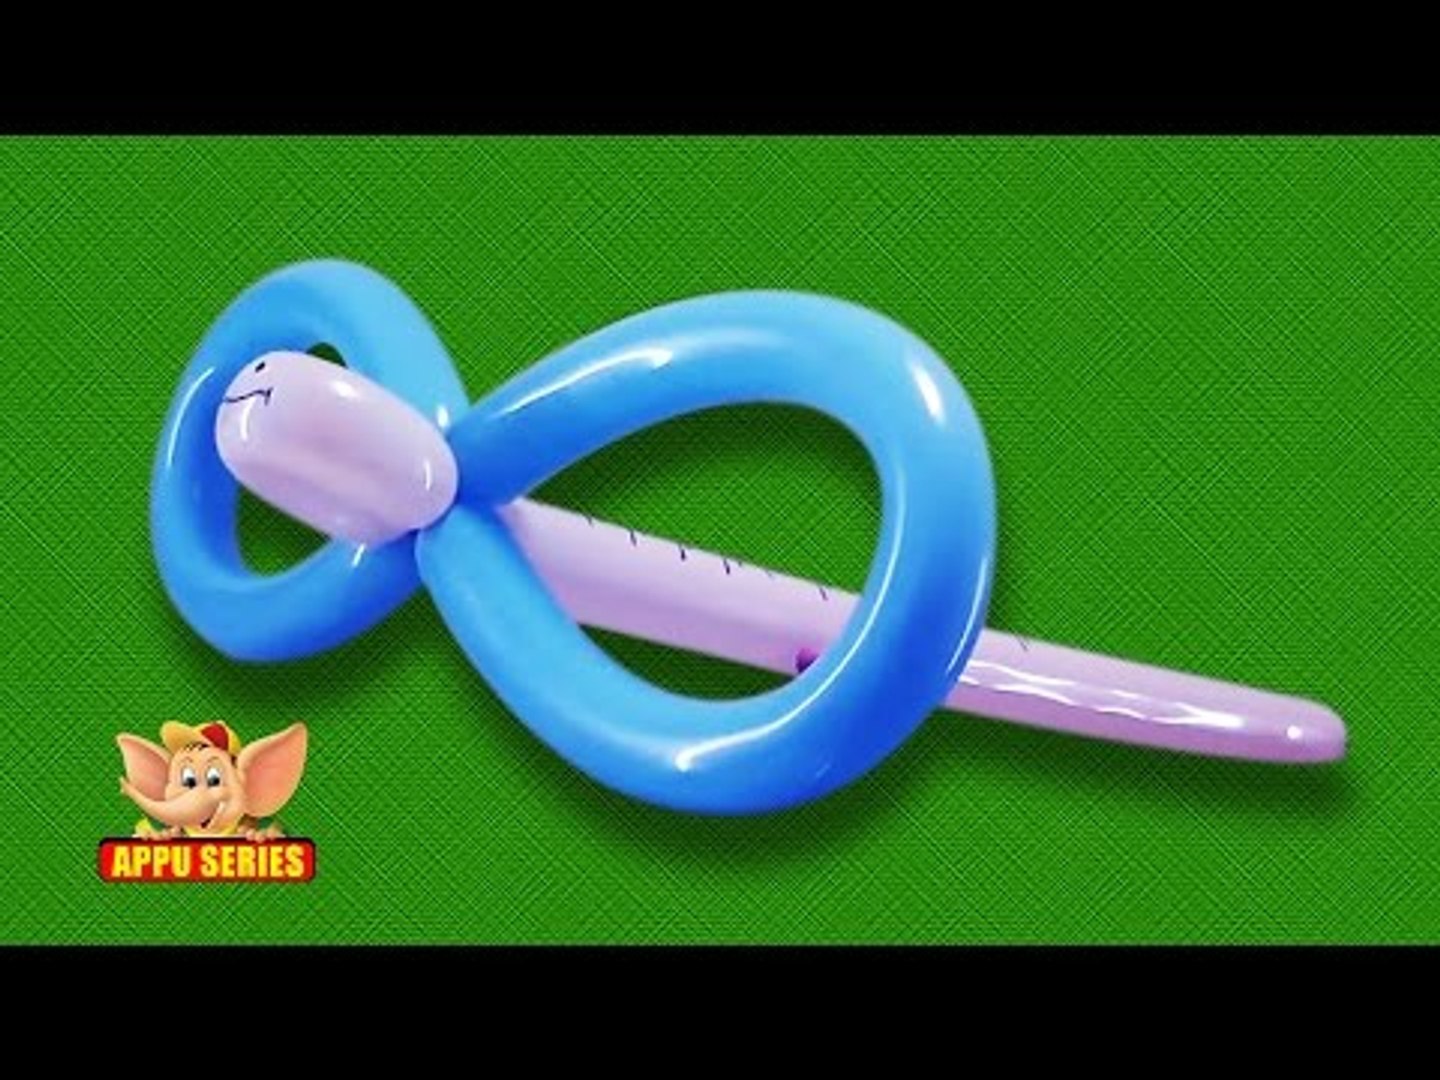 Balloon Sculpting - Easy way to sculpt a Dragonfly